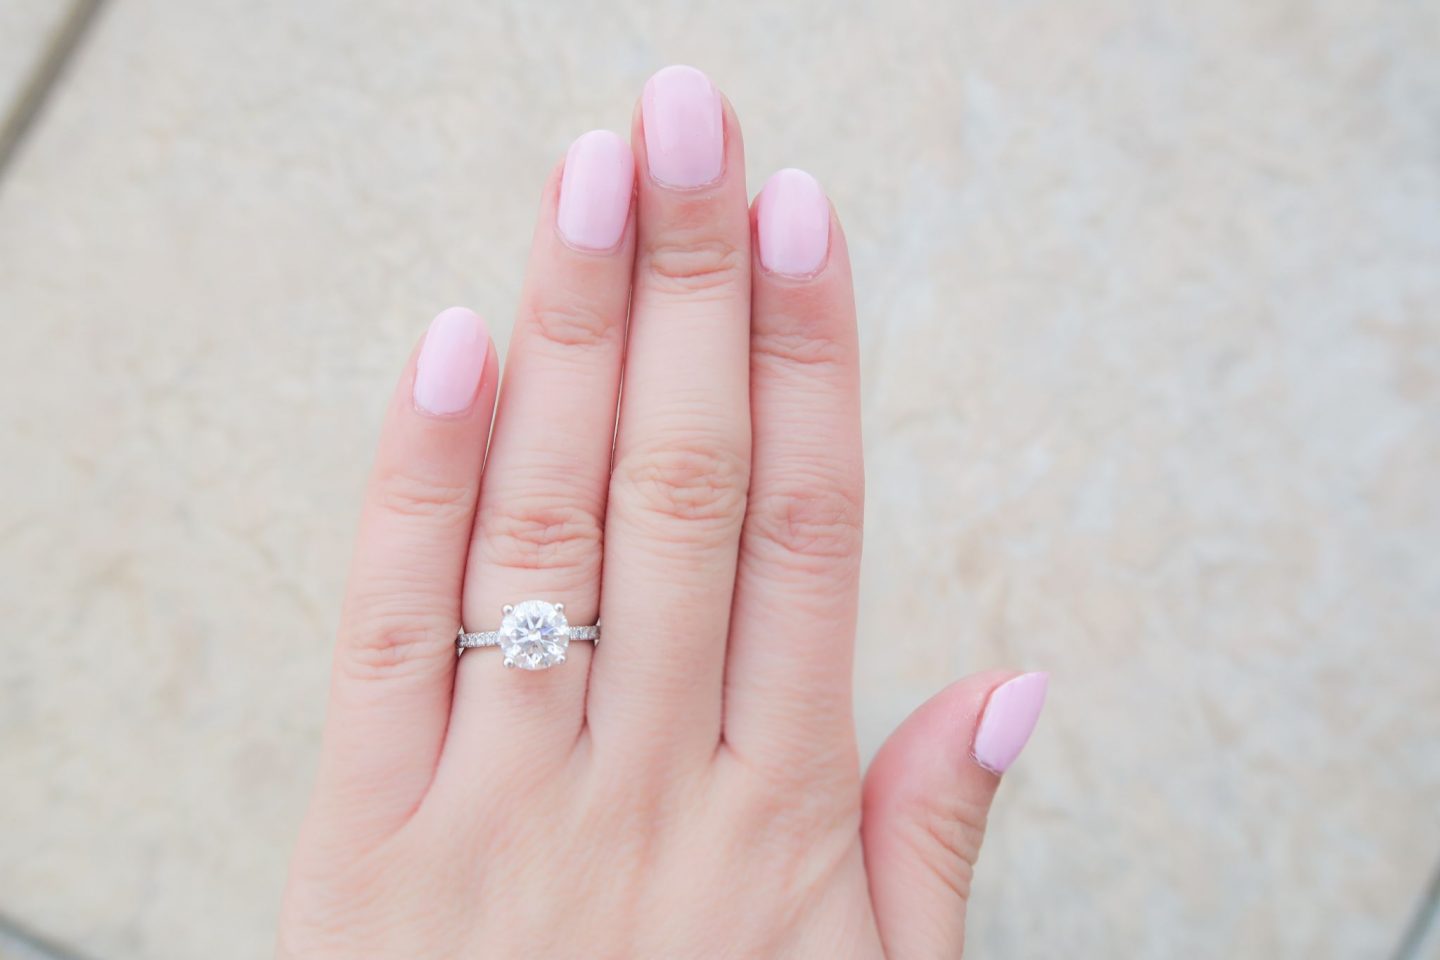 nail color for white hands